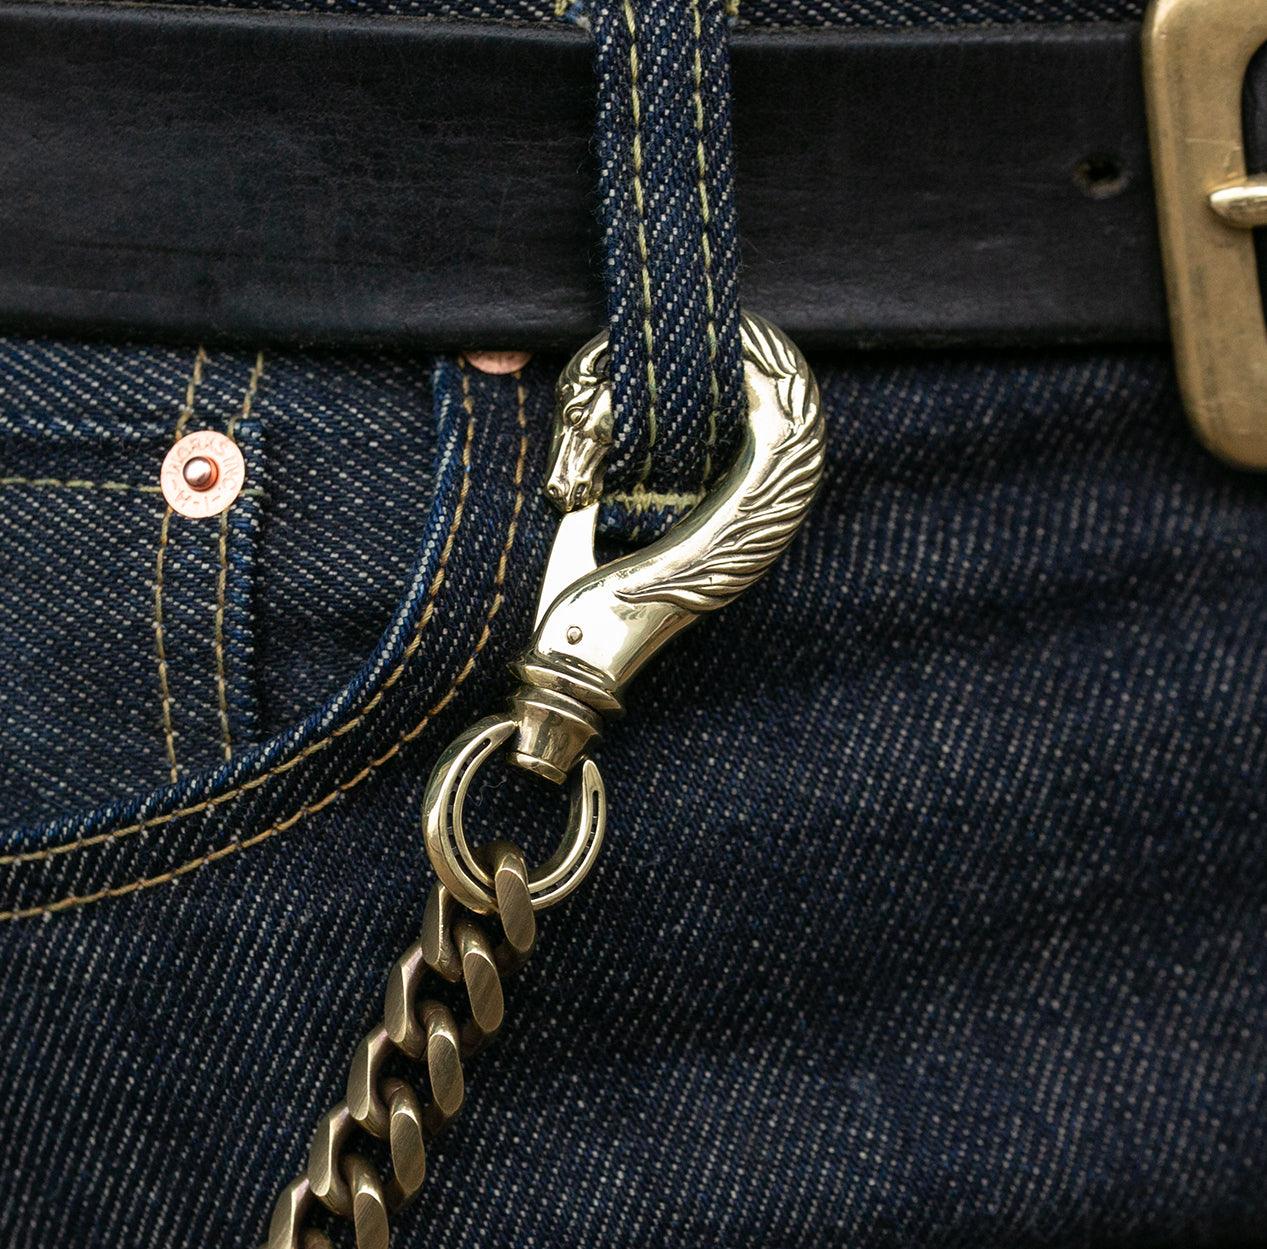 Peanuts & Co Horse Wallet Chain (horse×horse) - Brass